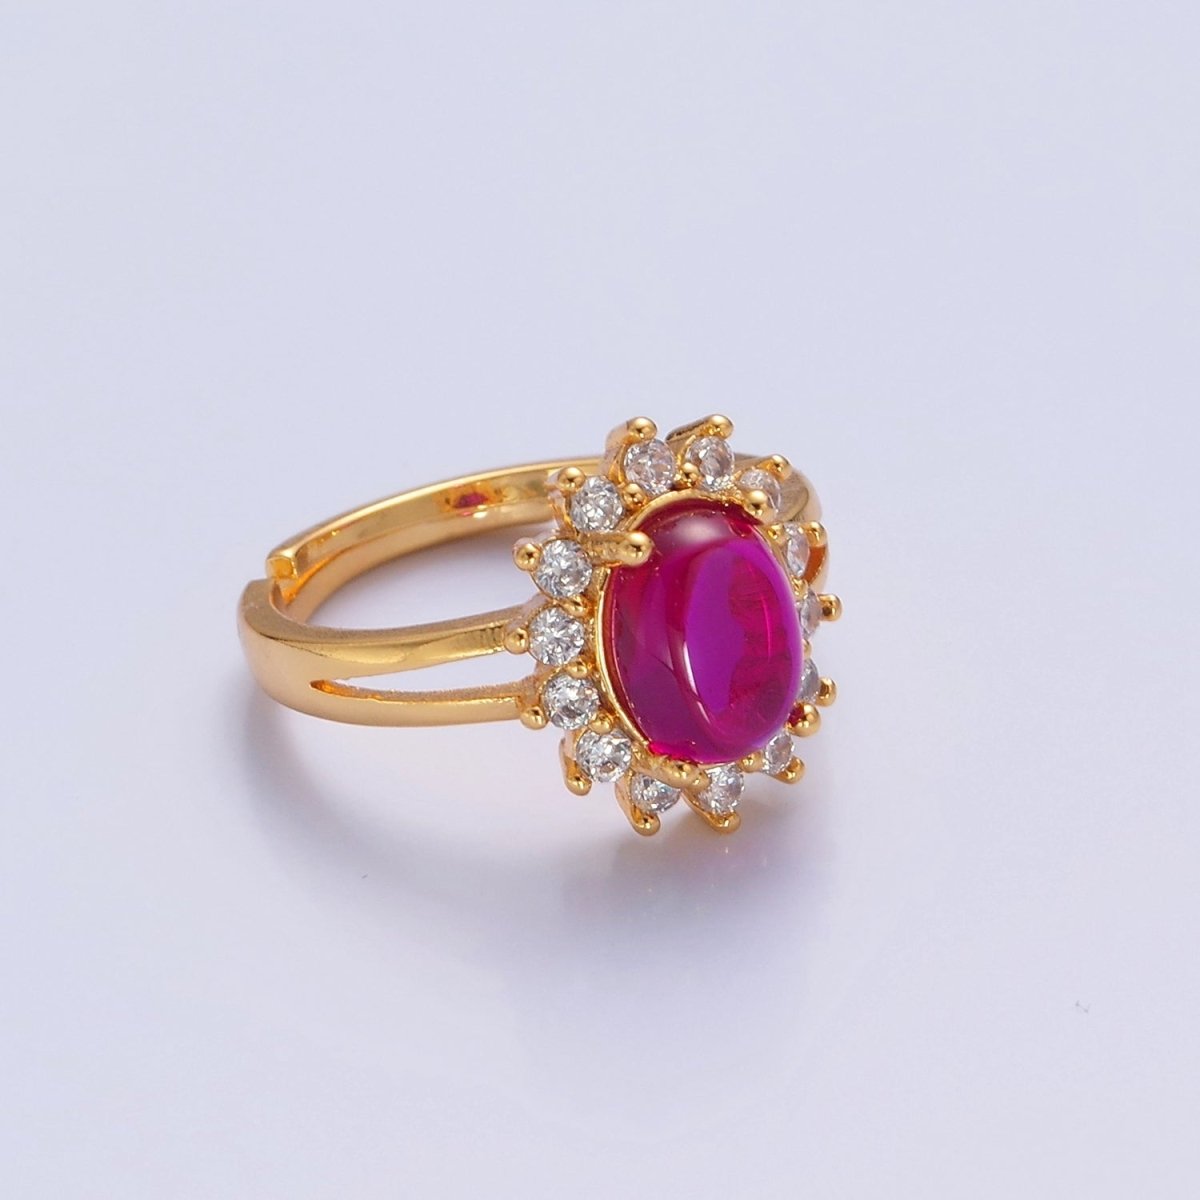 24K Gold Filled Celestial Sun Ring with Oval Fuchsia Jade Stone O-769 - DLUXCA